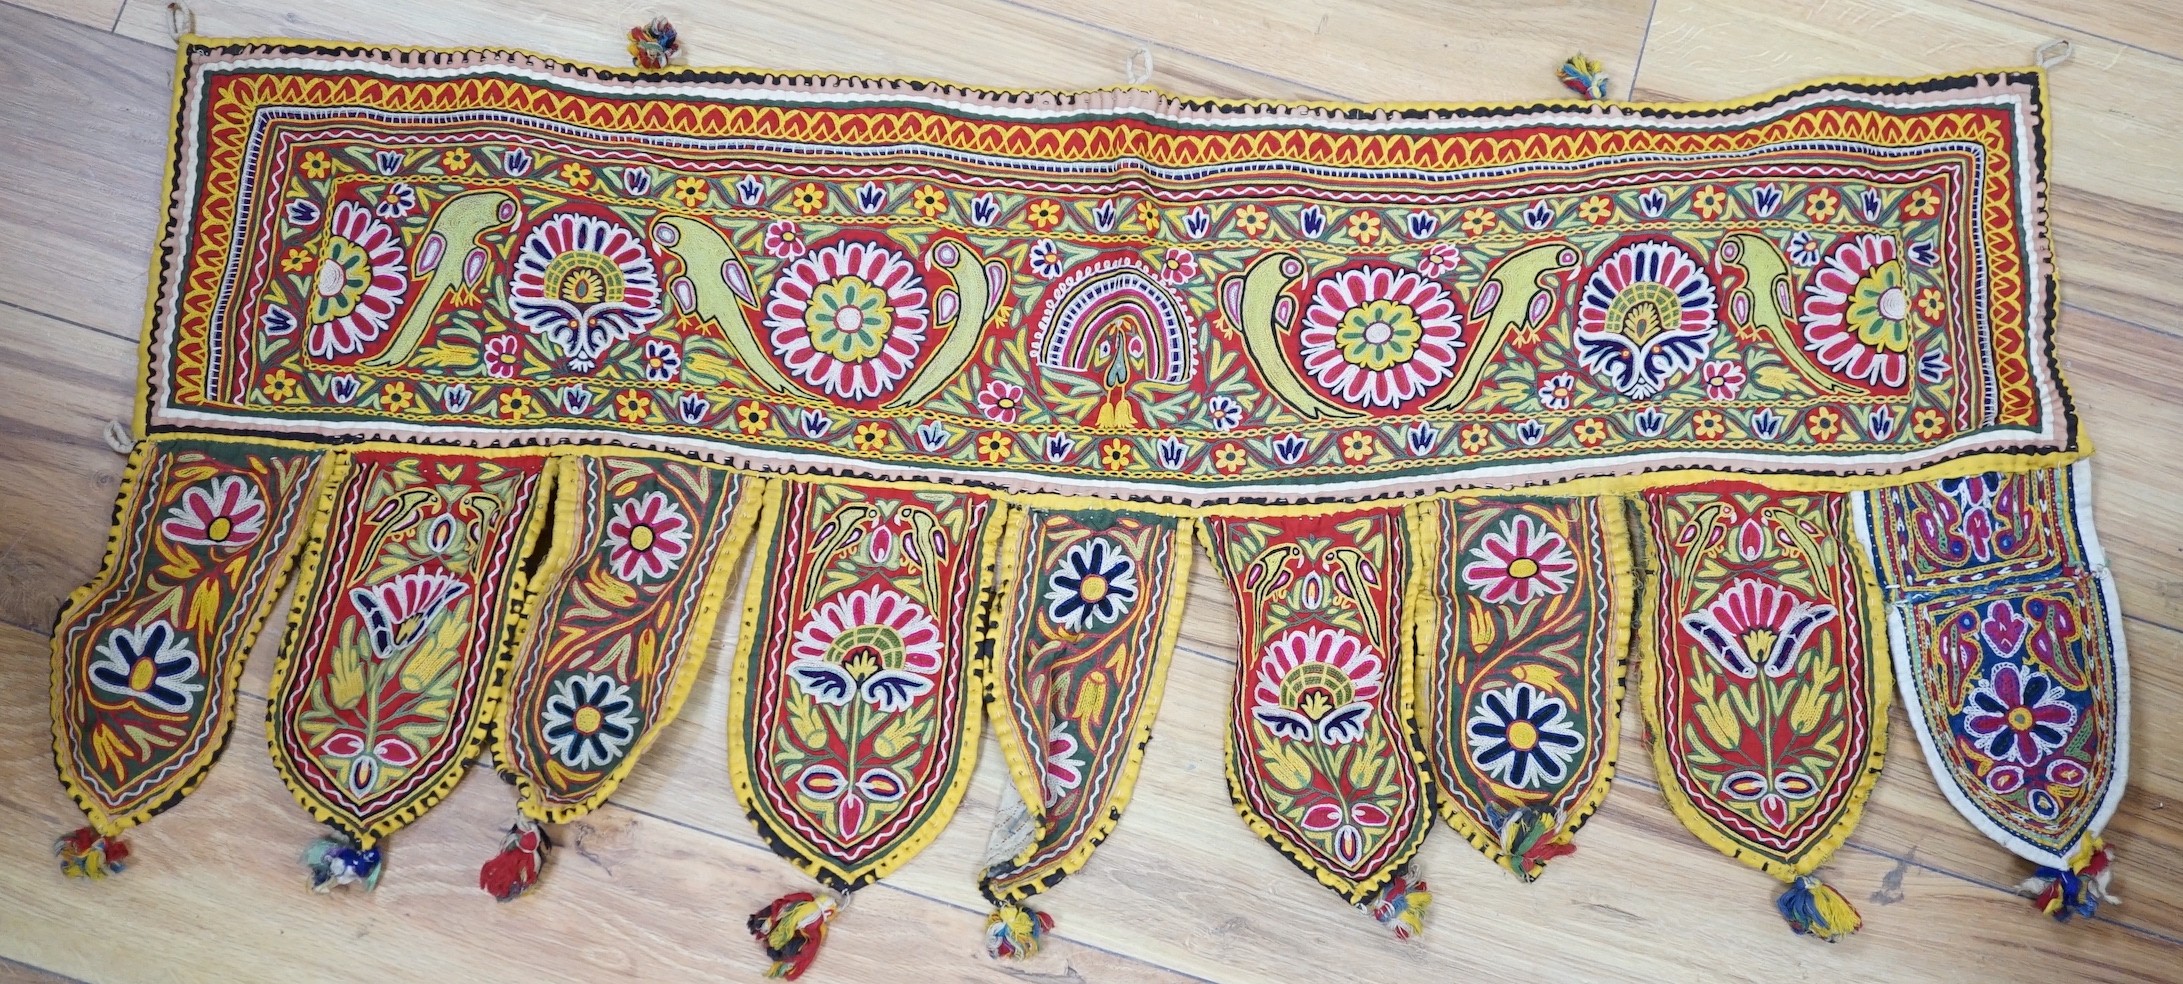 A collection of Indian mirrored worked hangings, a length of batik fabric and a woven shawl